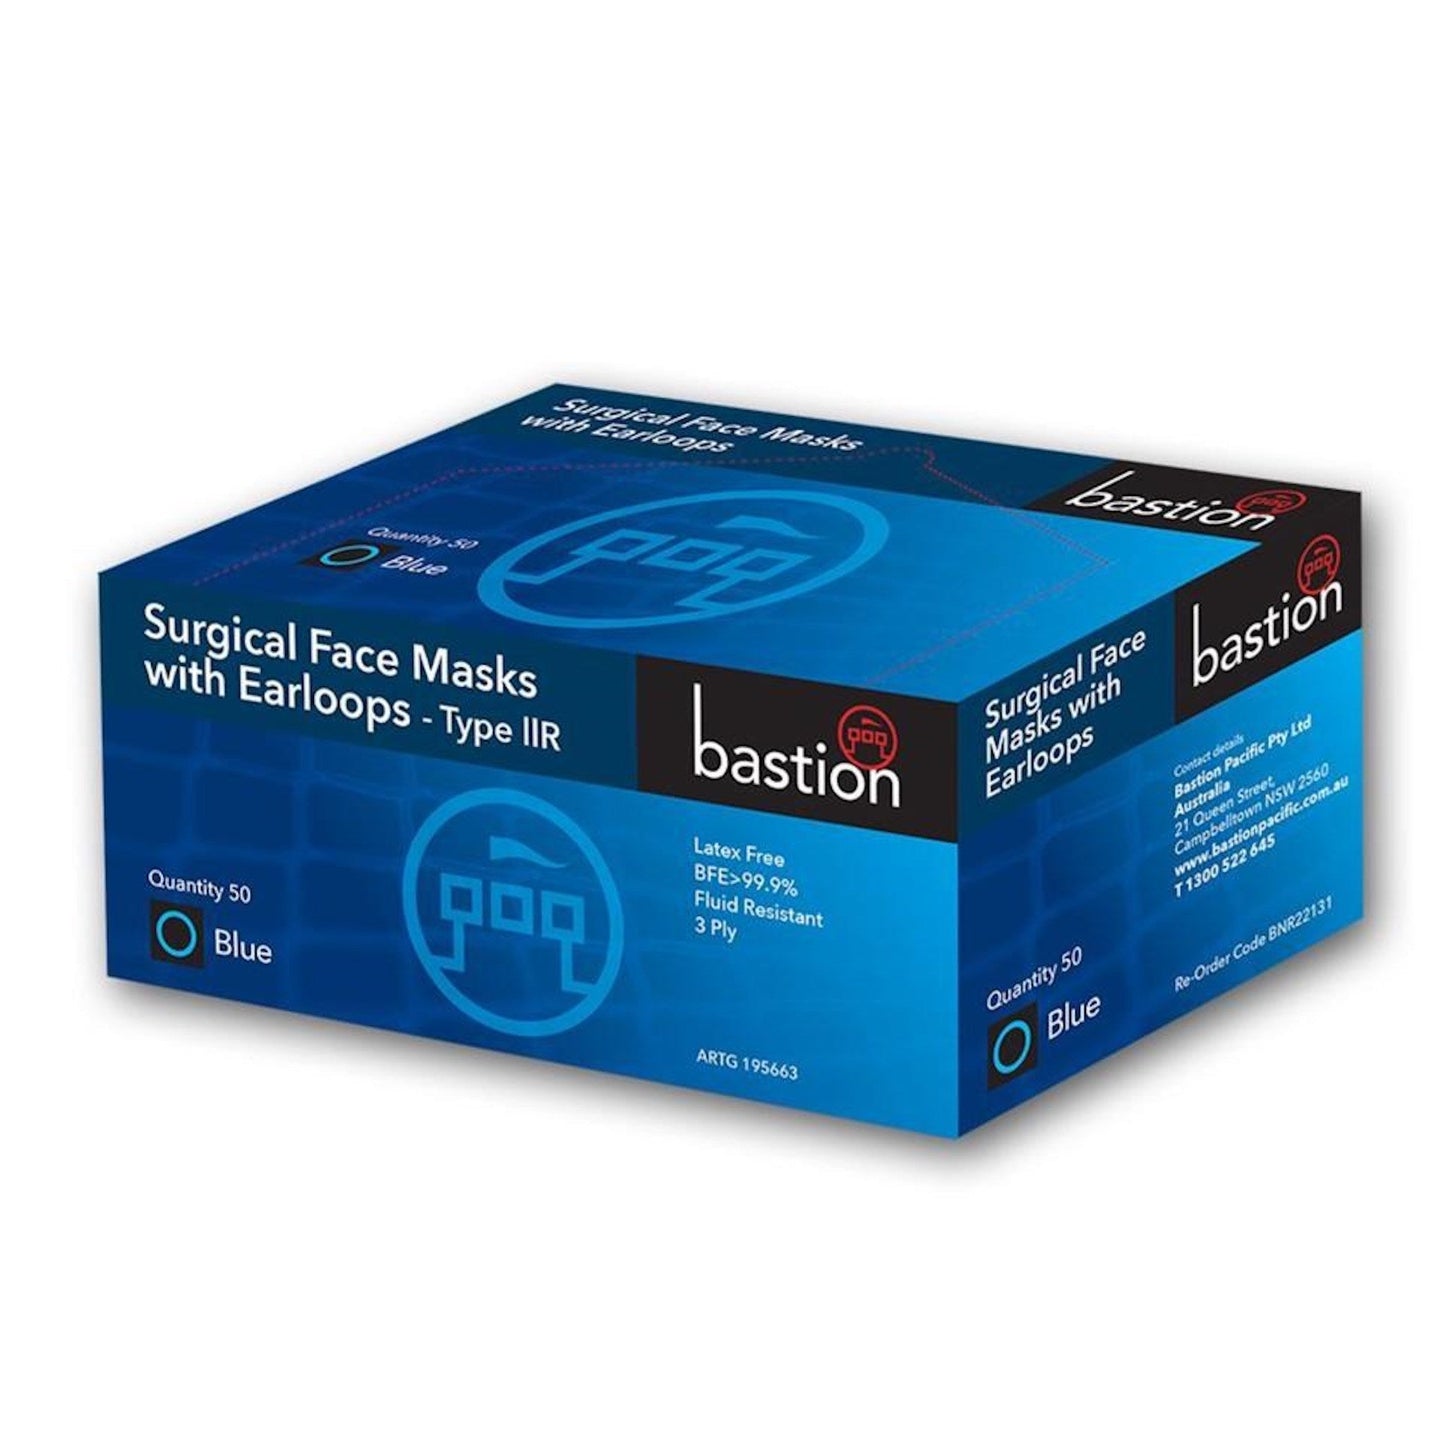 Bastion Surgical Face Masks - Earloops - Box (50pc)